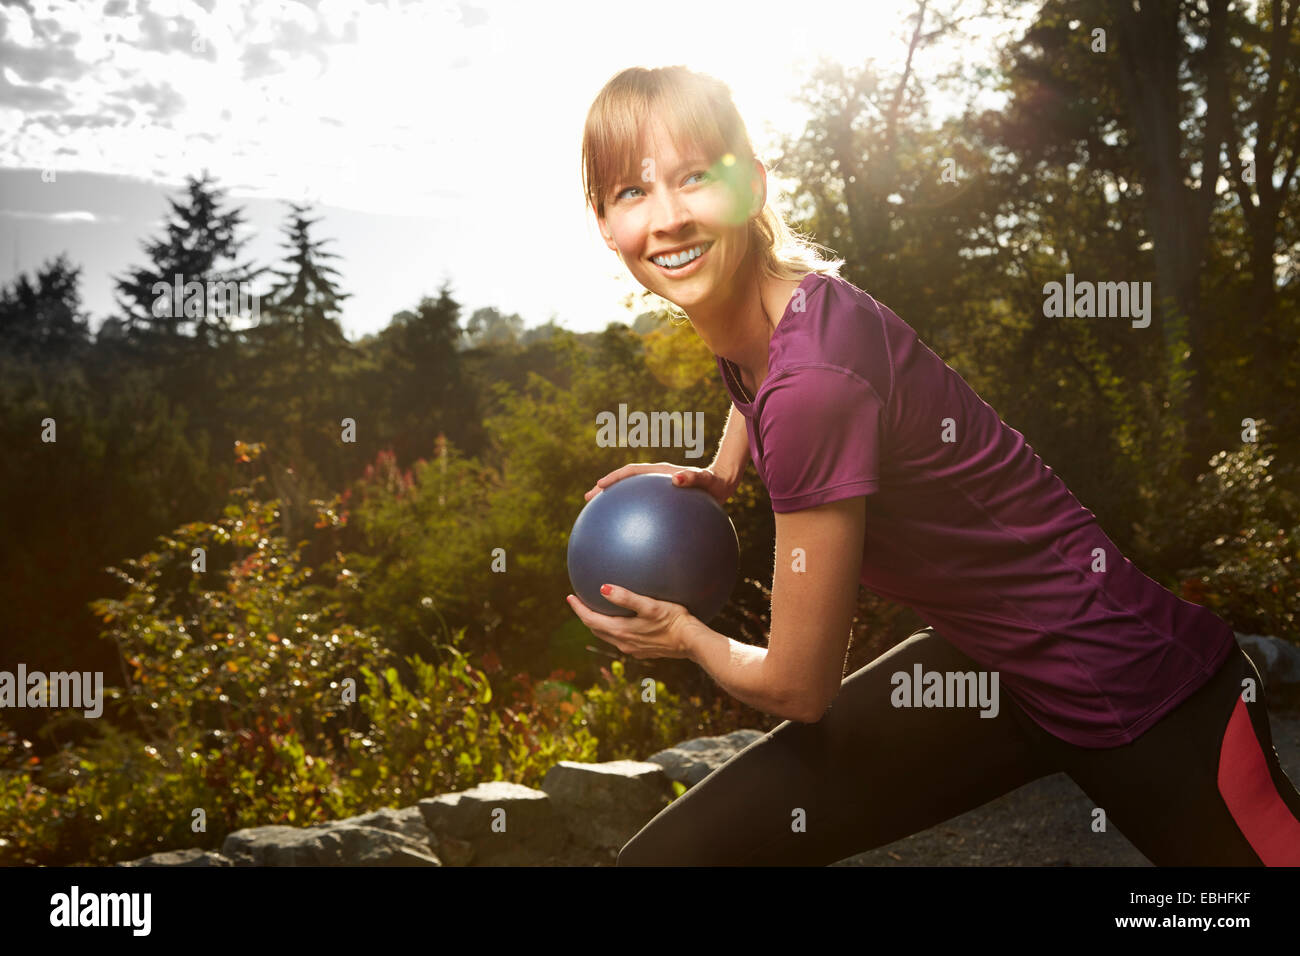 Mid adult woman using exercise ball in park Banque D'Images